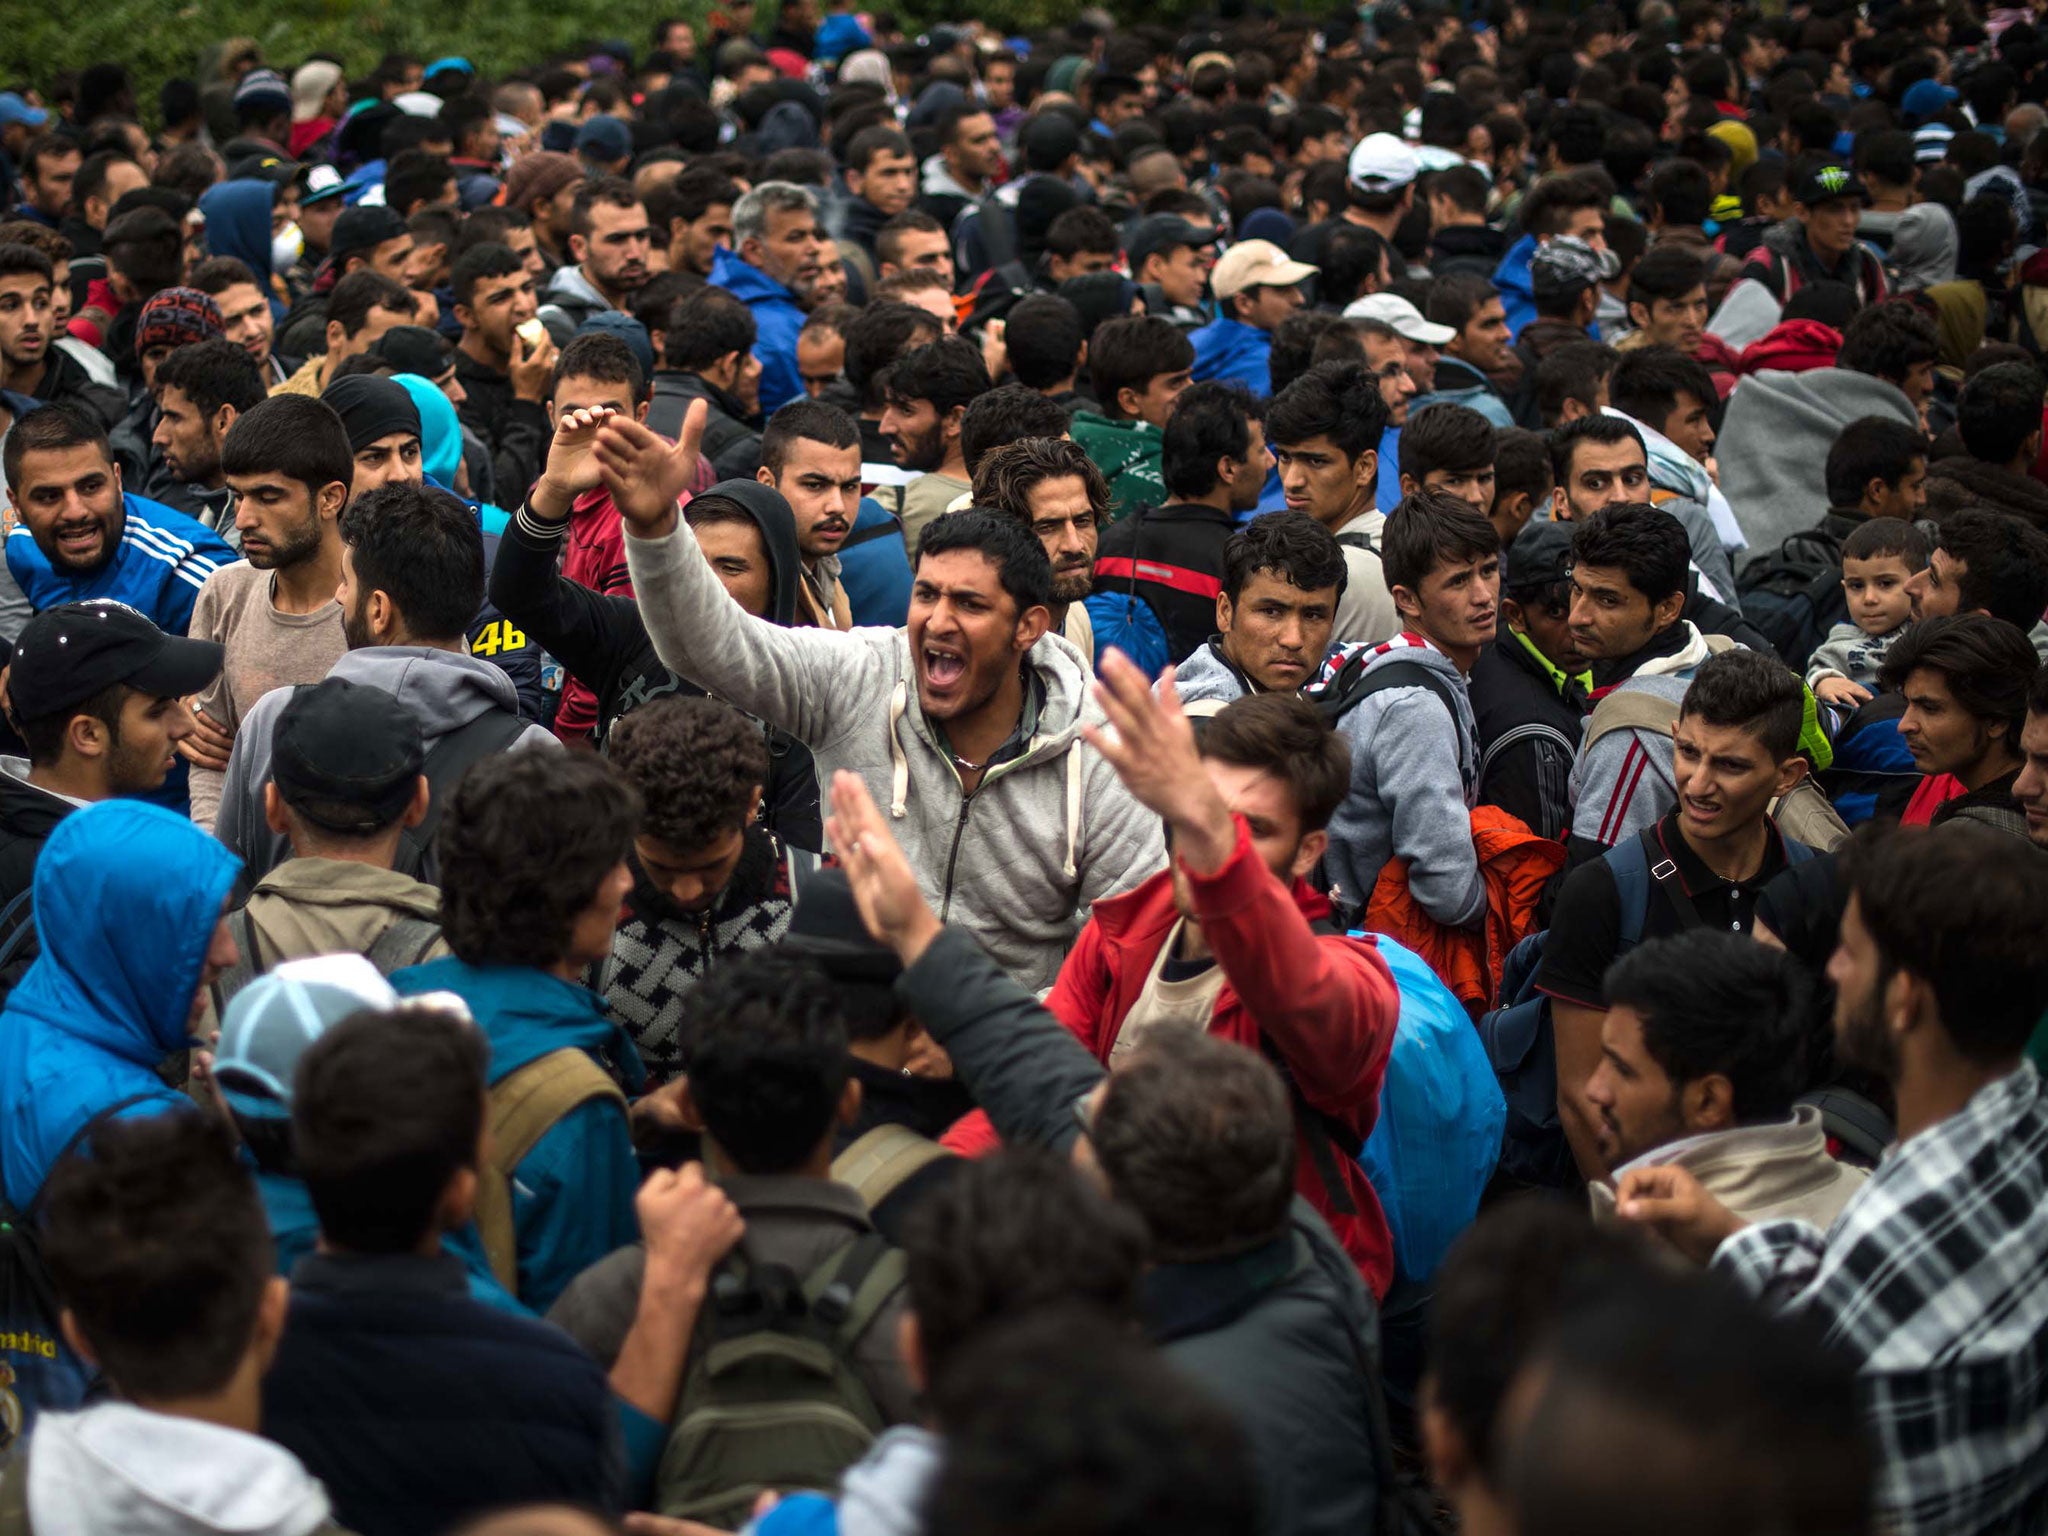 Refugees from Syria try to organise the queue as they wait to cross into Croatia through the Serbian border on 25 September, 2015 in Bapska, Croatia